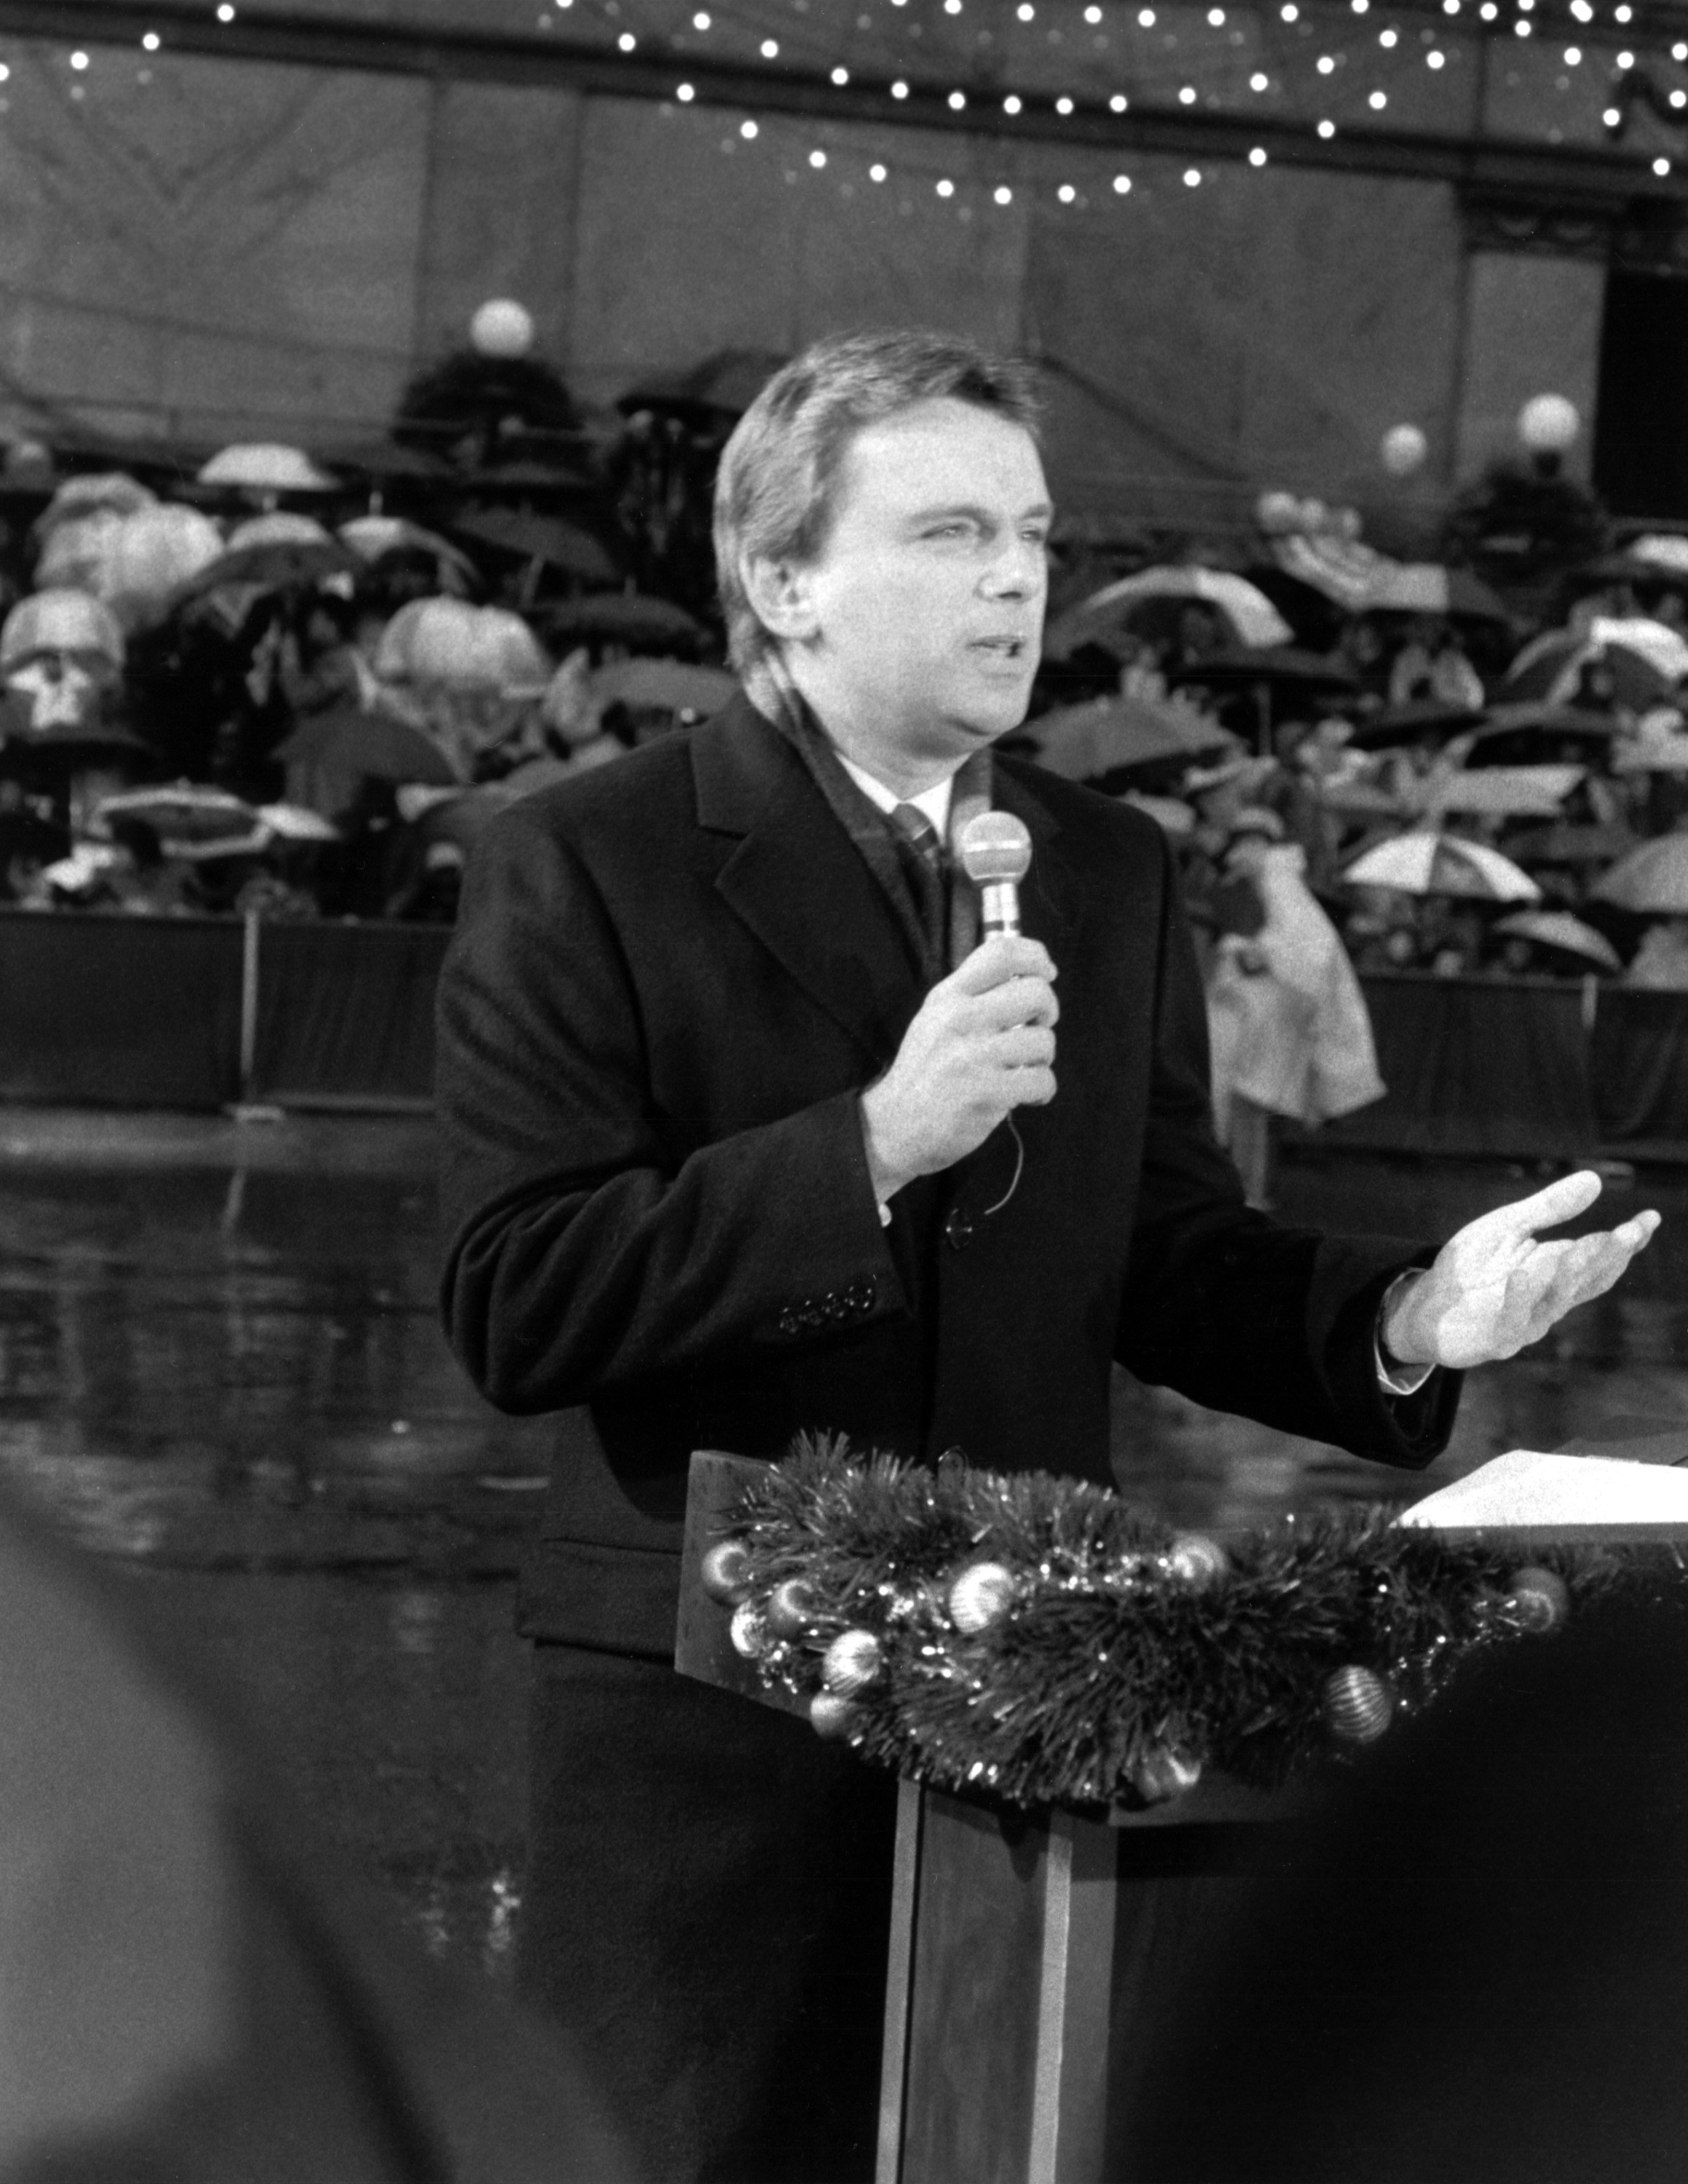 Pat Sajak at Macy's Thanksgiving Day Parade on November 28, 1985. | Source: Getty Images